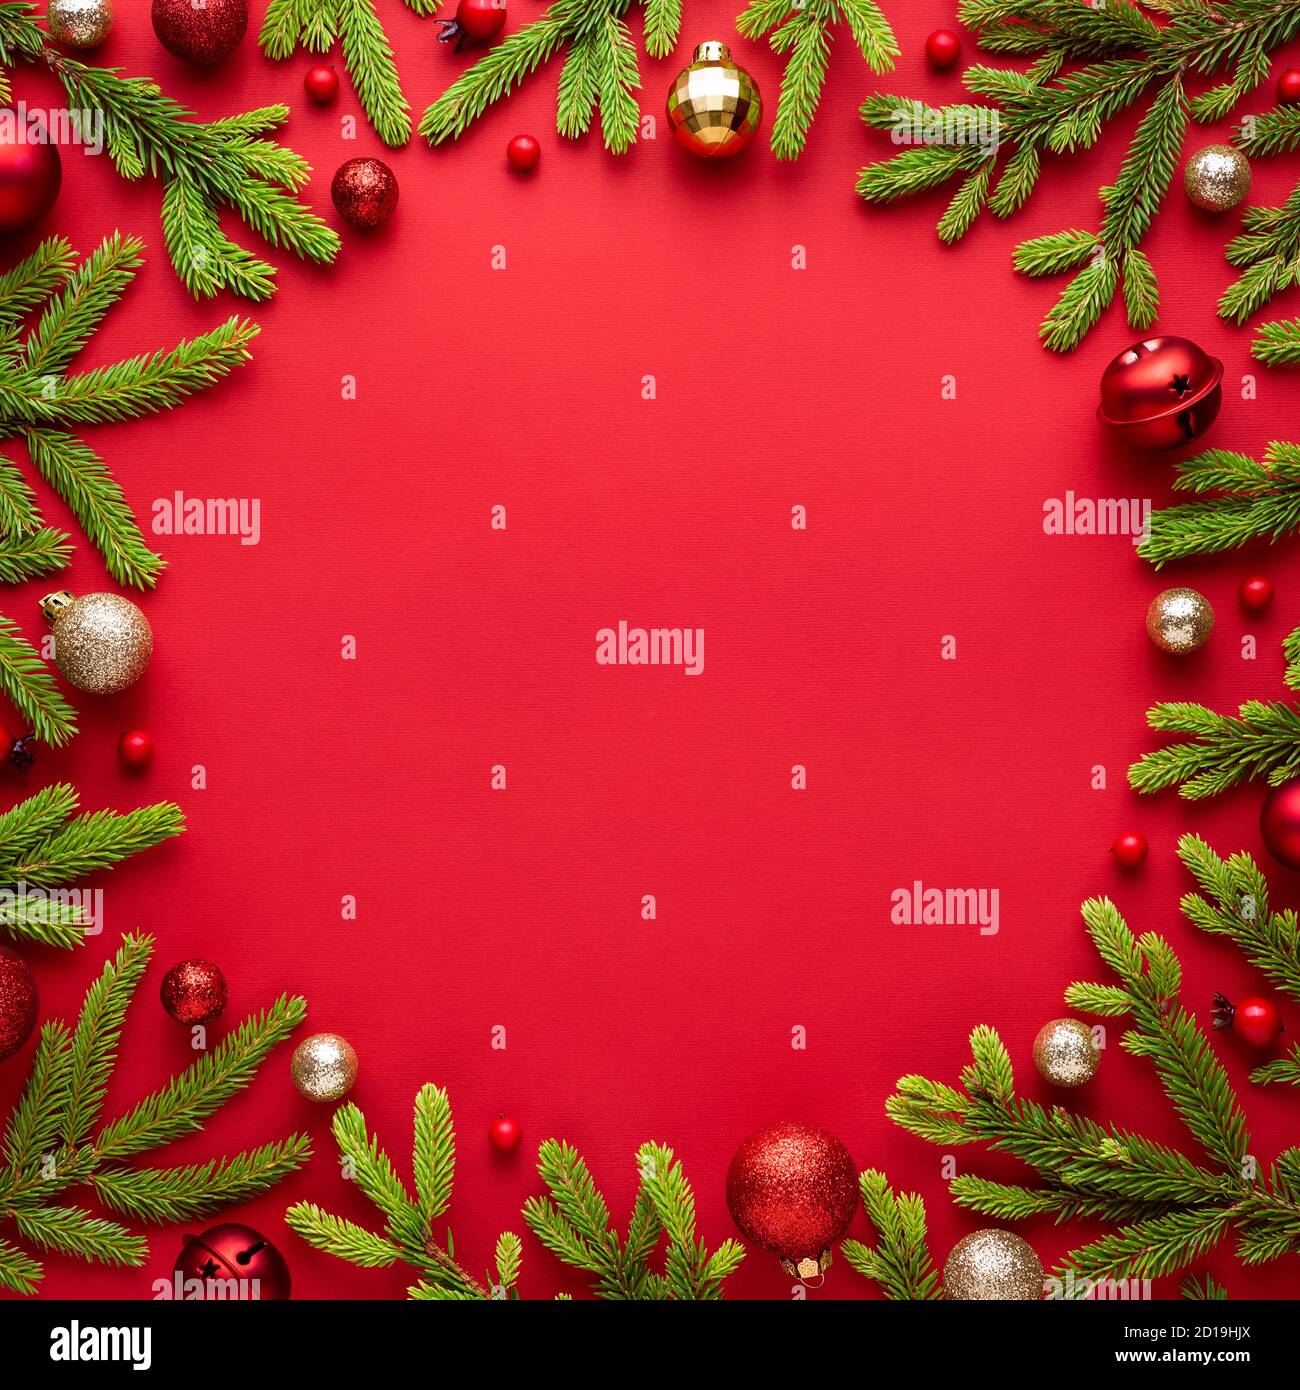 Christmas card with round frame on red background. Festive border with copy space for advertising text. Top view, flat lay Stock Photo